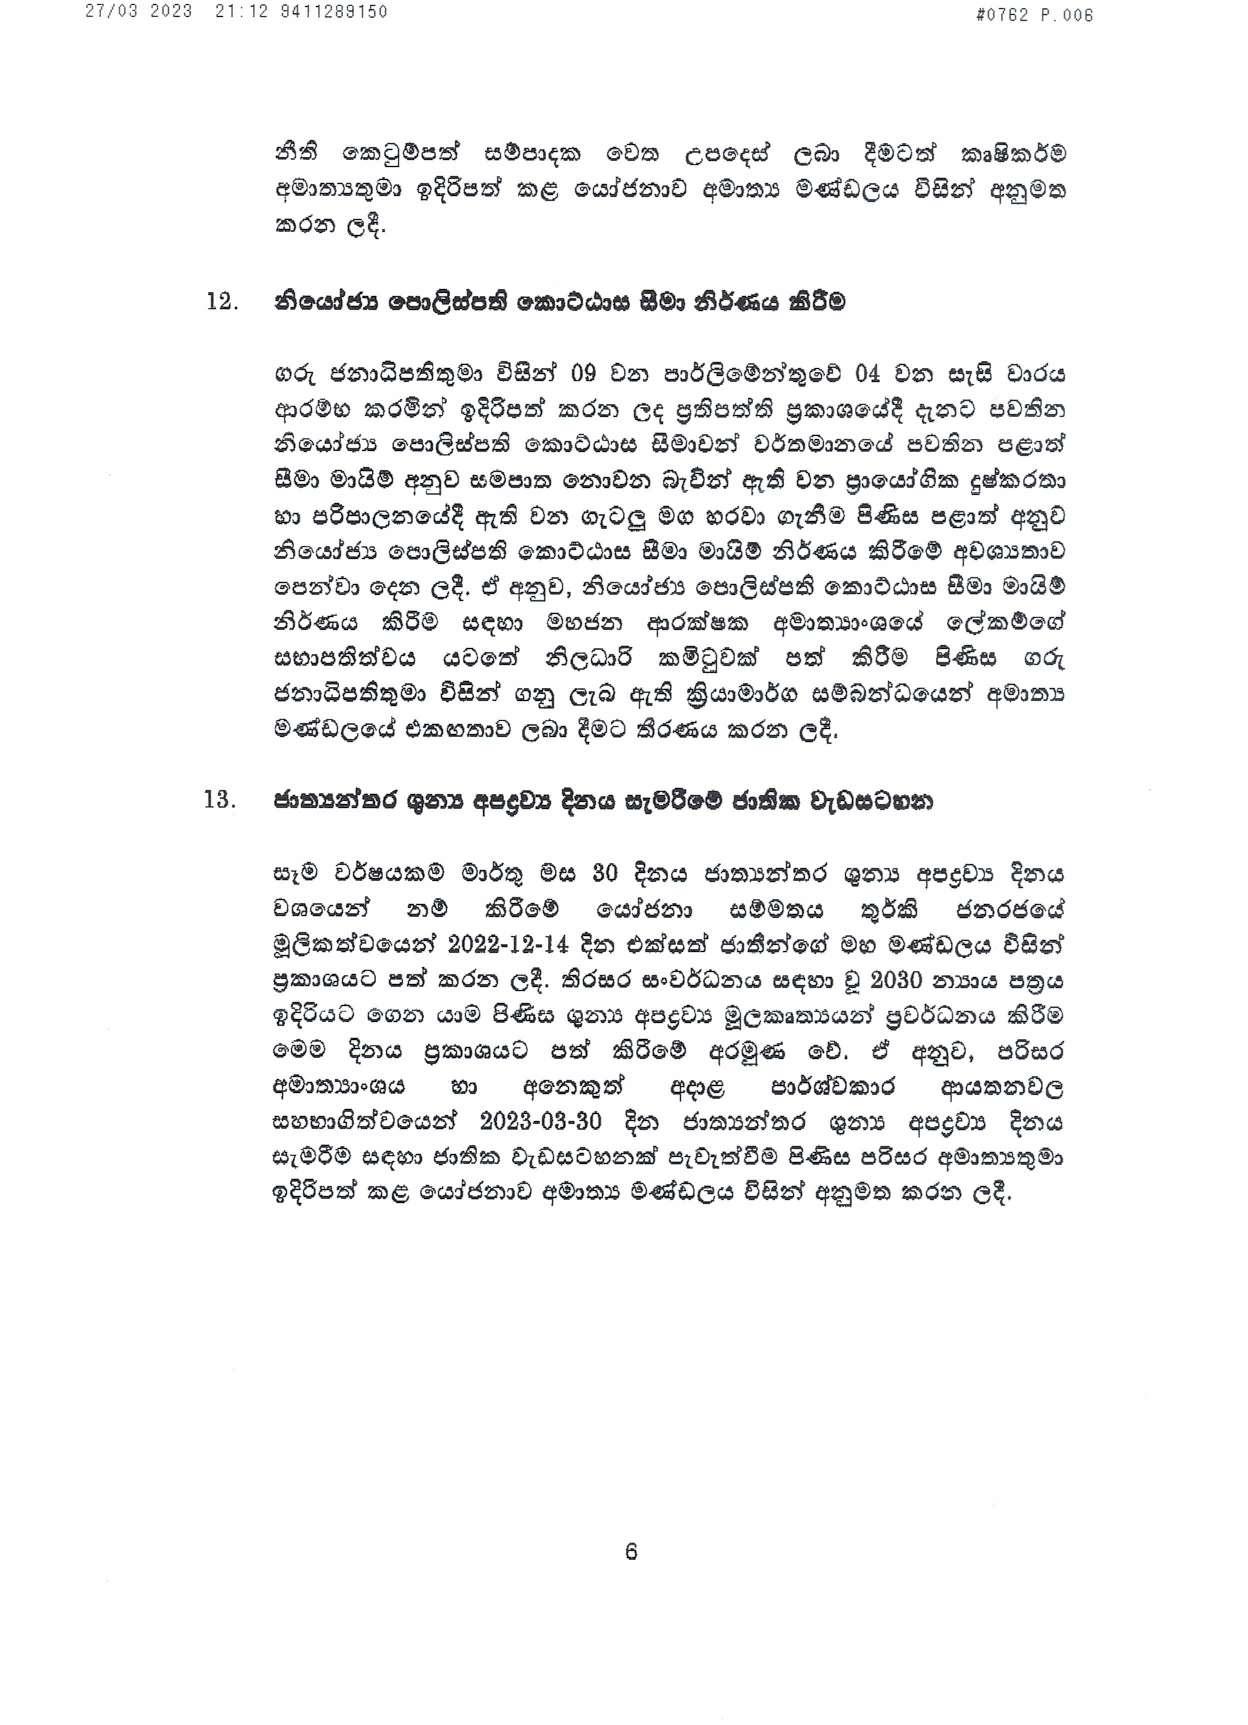 Cabinet Decision on 27.03.2023 page 006